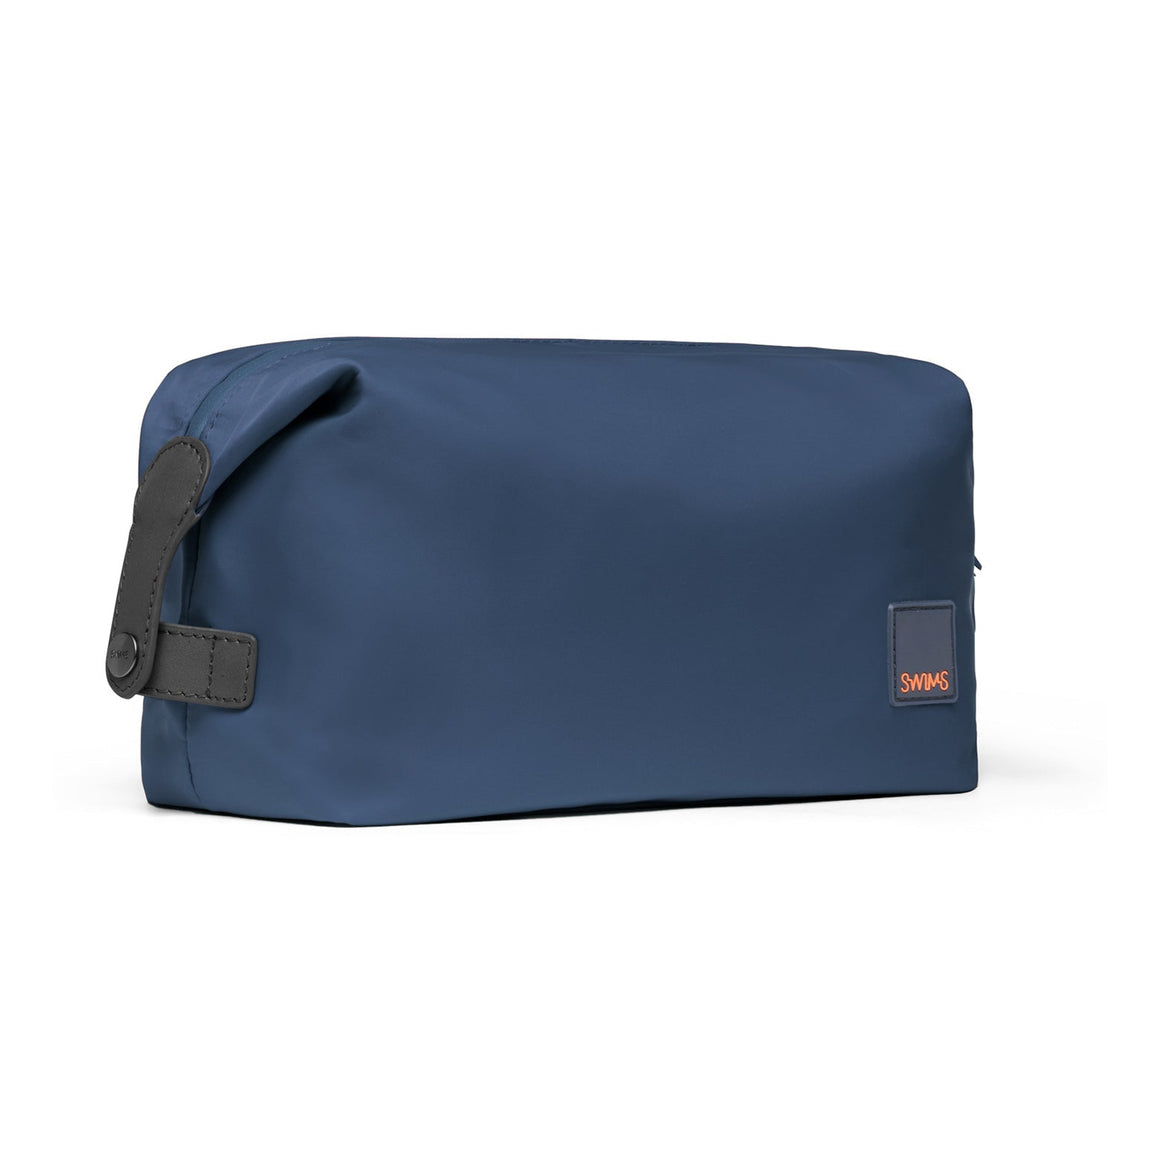 NECESSAIRE TOILETRIE-53228-002-O/SNAVY-TRAVEL ACCESSORIES-SWIMS-JB Evans Fashions & Footwear